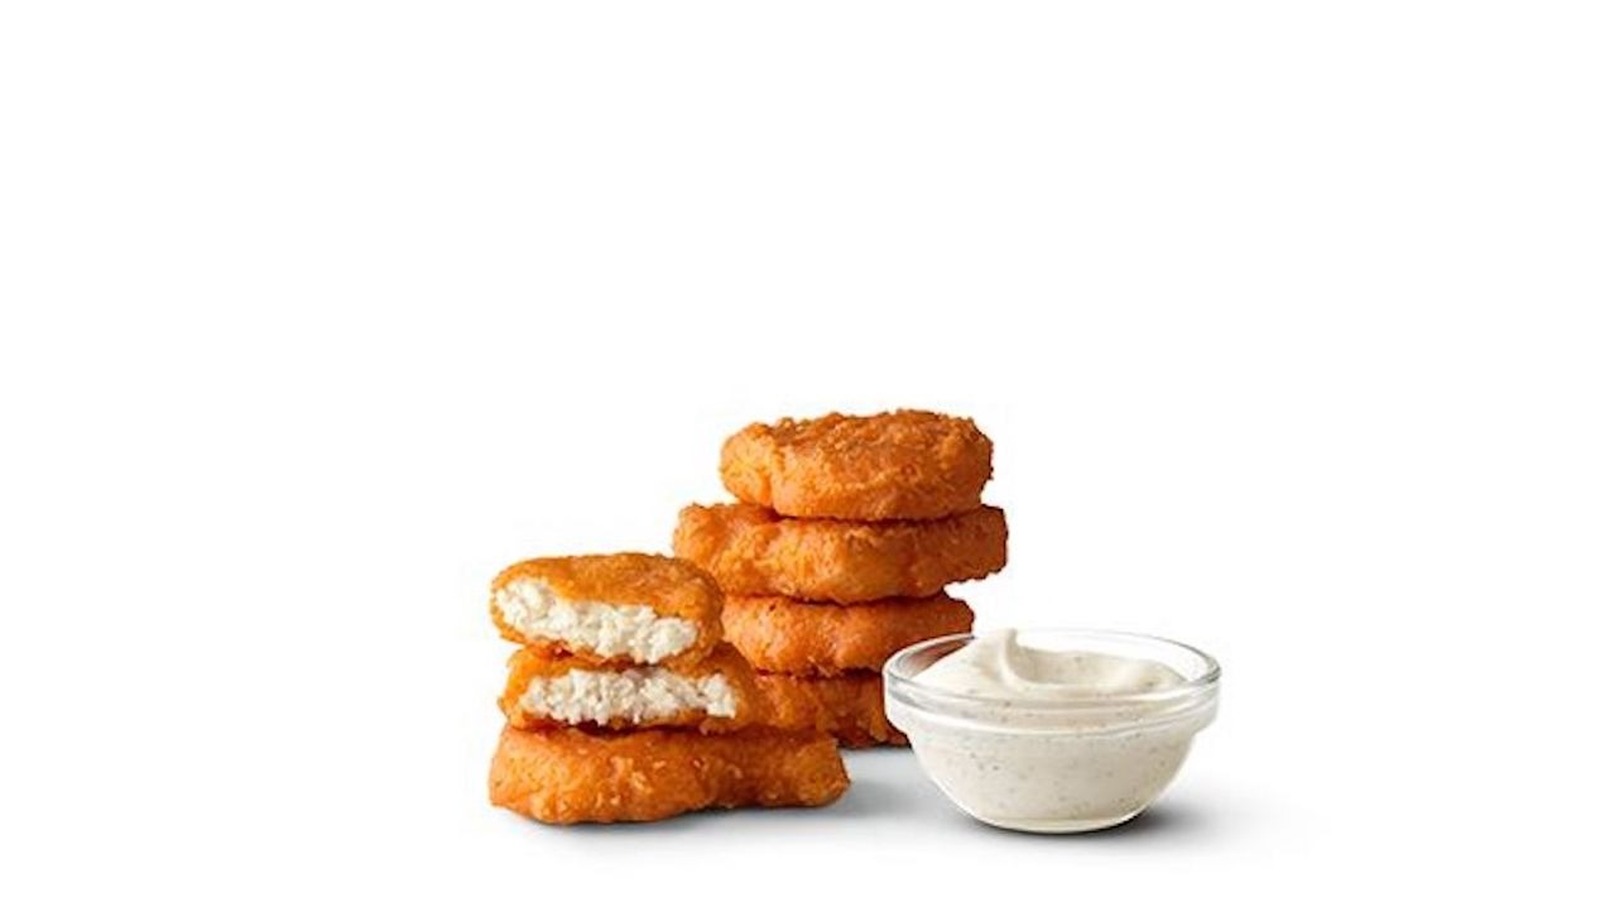 Chicken McNuggets® - 6 pieces Meal